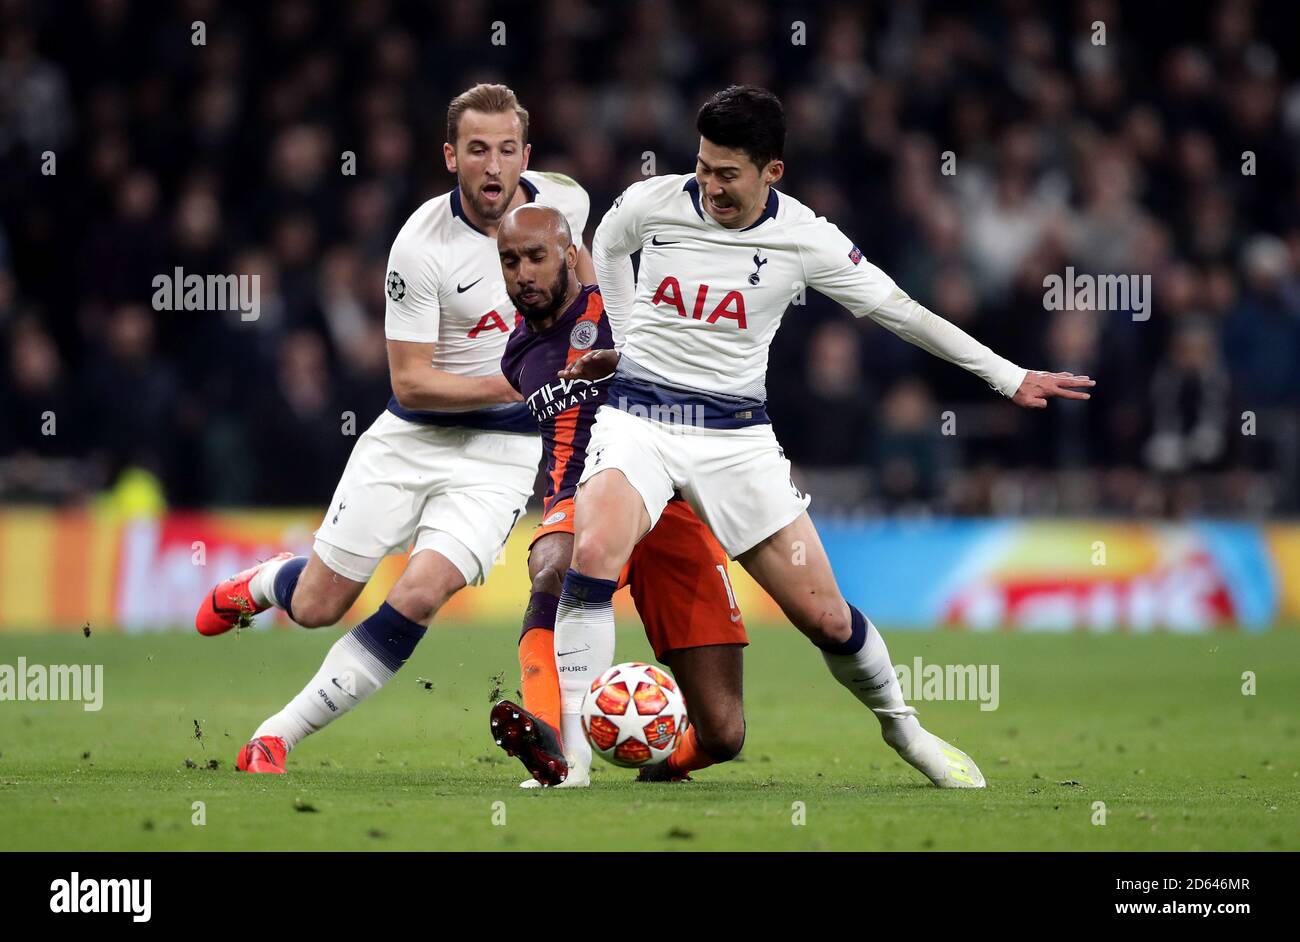 Manchester City's Fabian Delph battles for the ball with Tottenham Hotspur's Harry Kane (left) and Son Heung-min Stock Photo